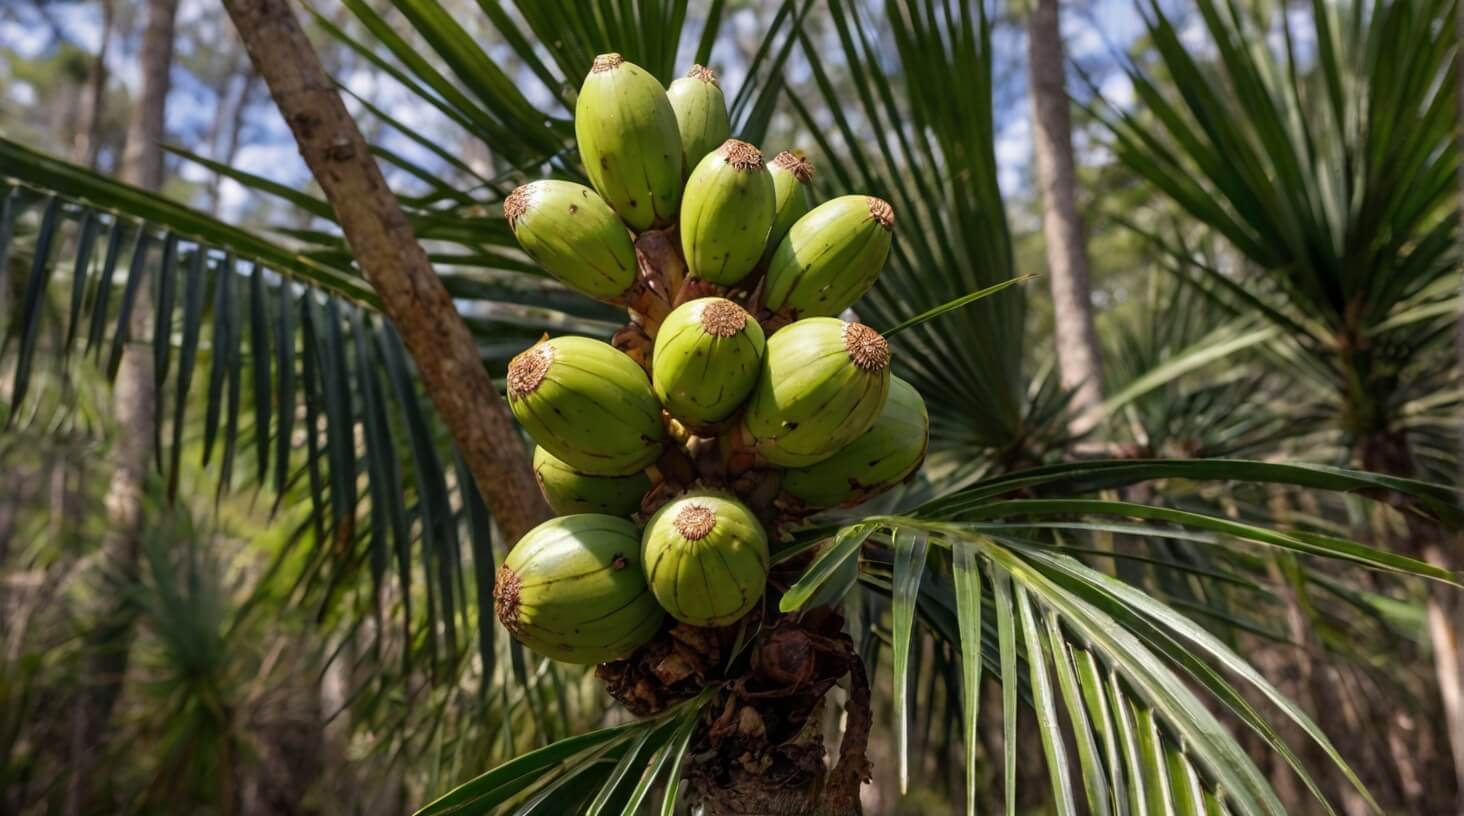 A cluster of saw palmetto berries on a palm frond against a natural green background